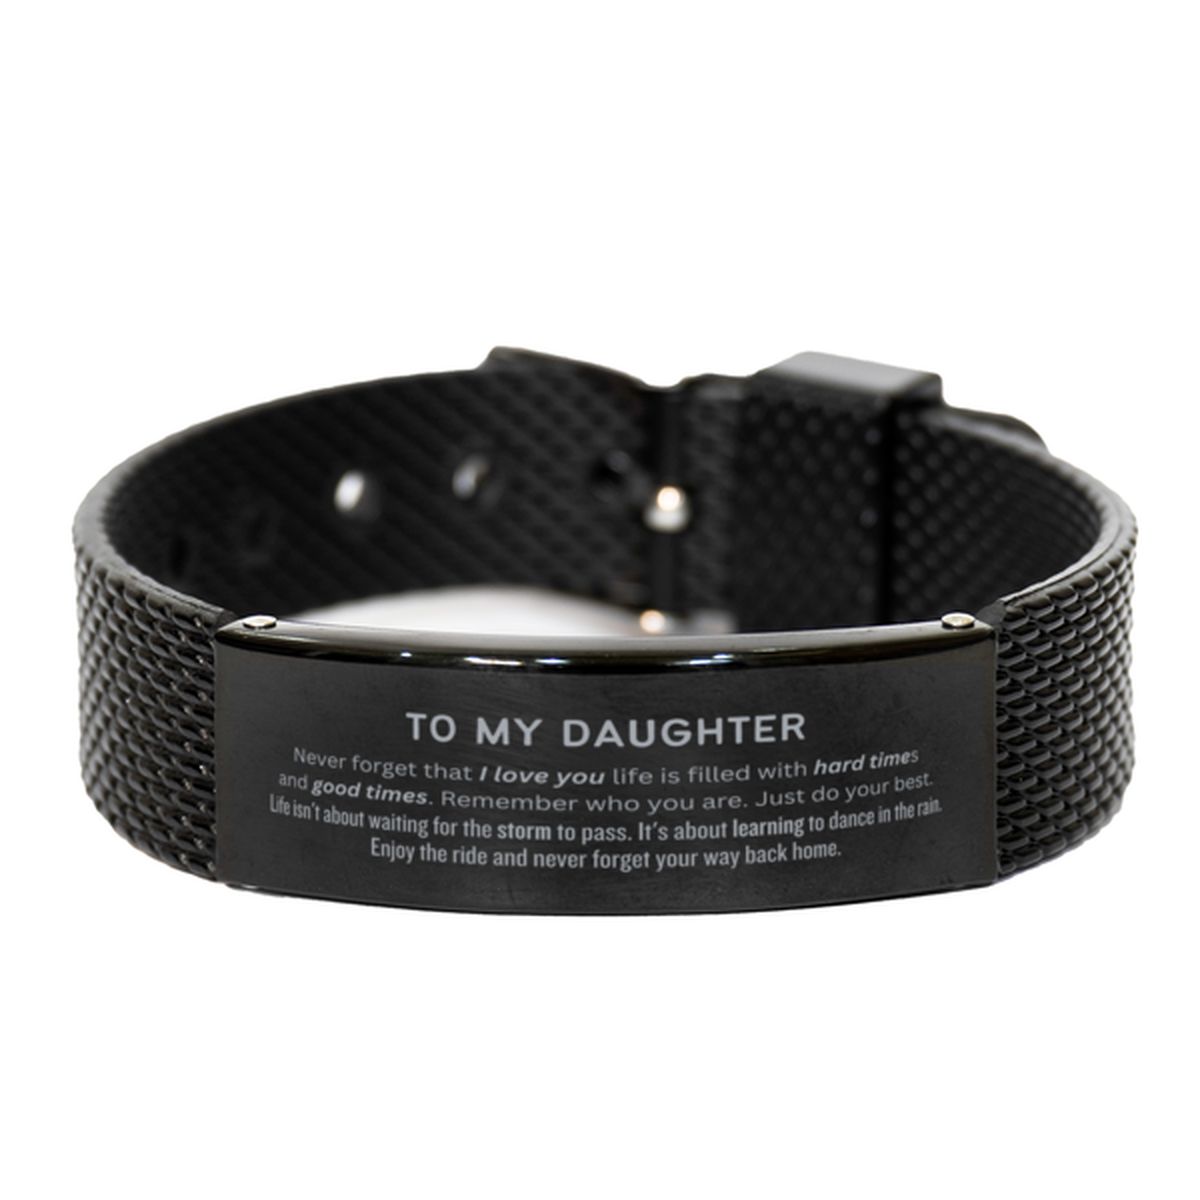 Christmas Daughter Black Shark Mesh Bracelet Gifts, To My Daughter Birthday Thank You Gifts For Daughter, Graduation Unique Gifts For Daughter To My Daughter Never forget that I love you life is filled with hard times and good times. Remember who you are.